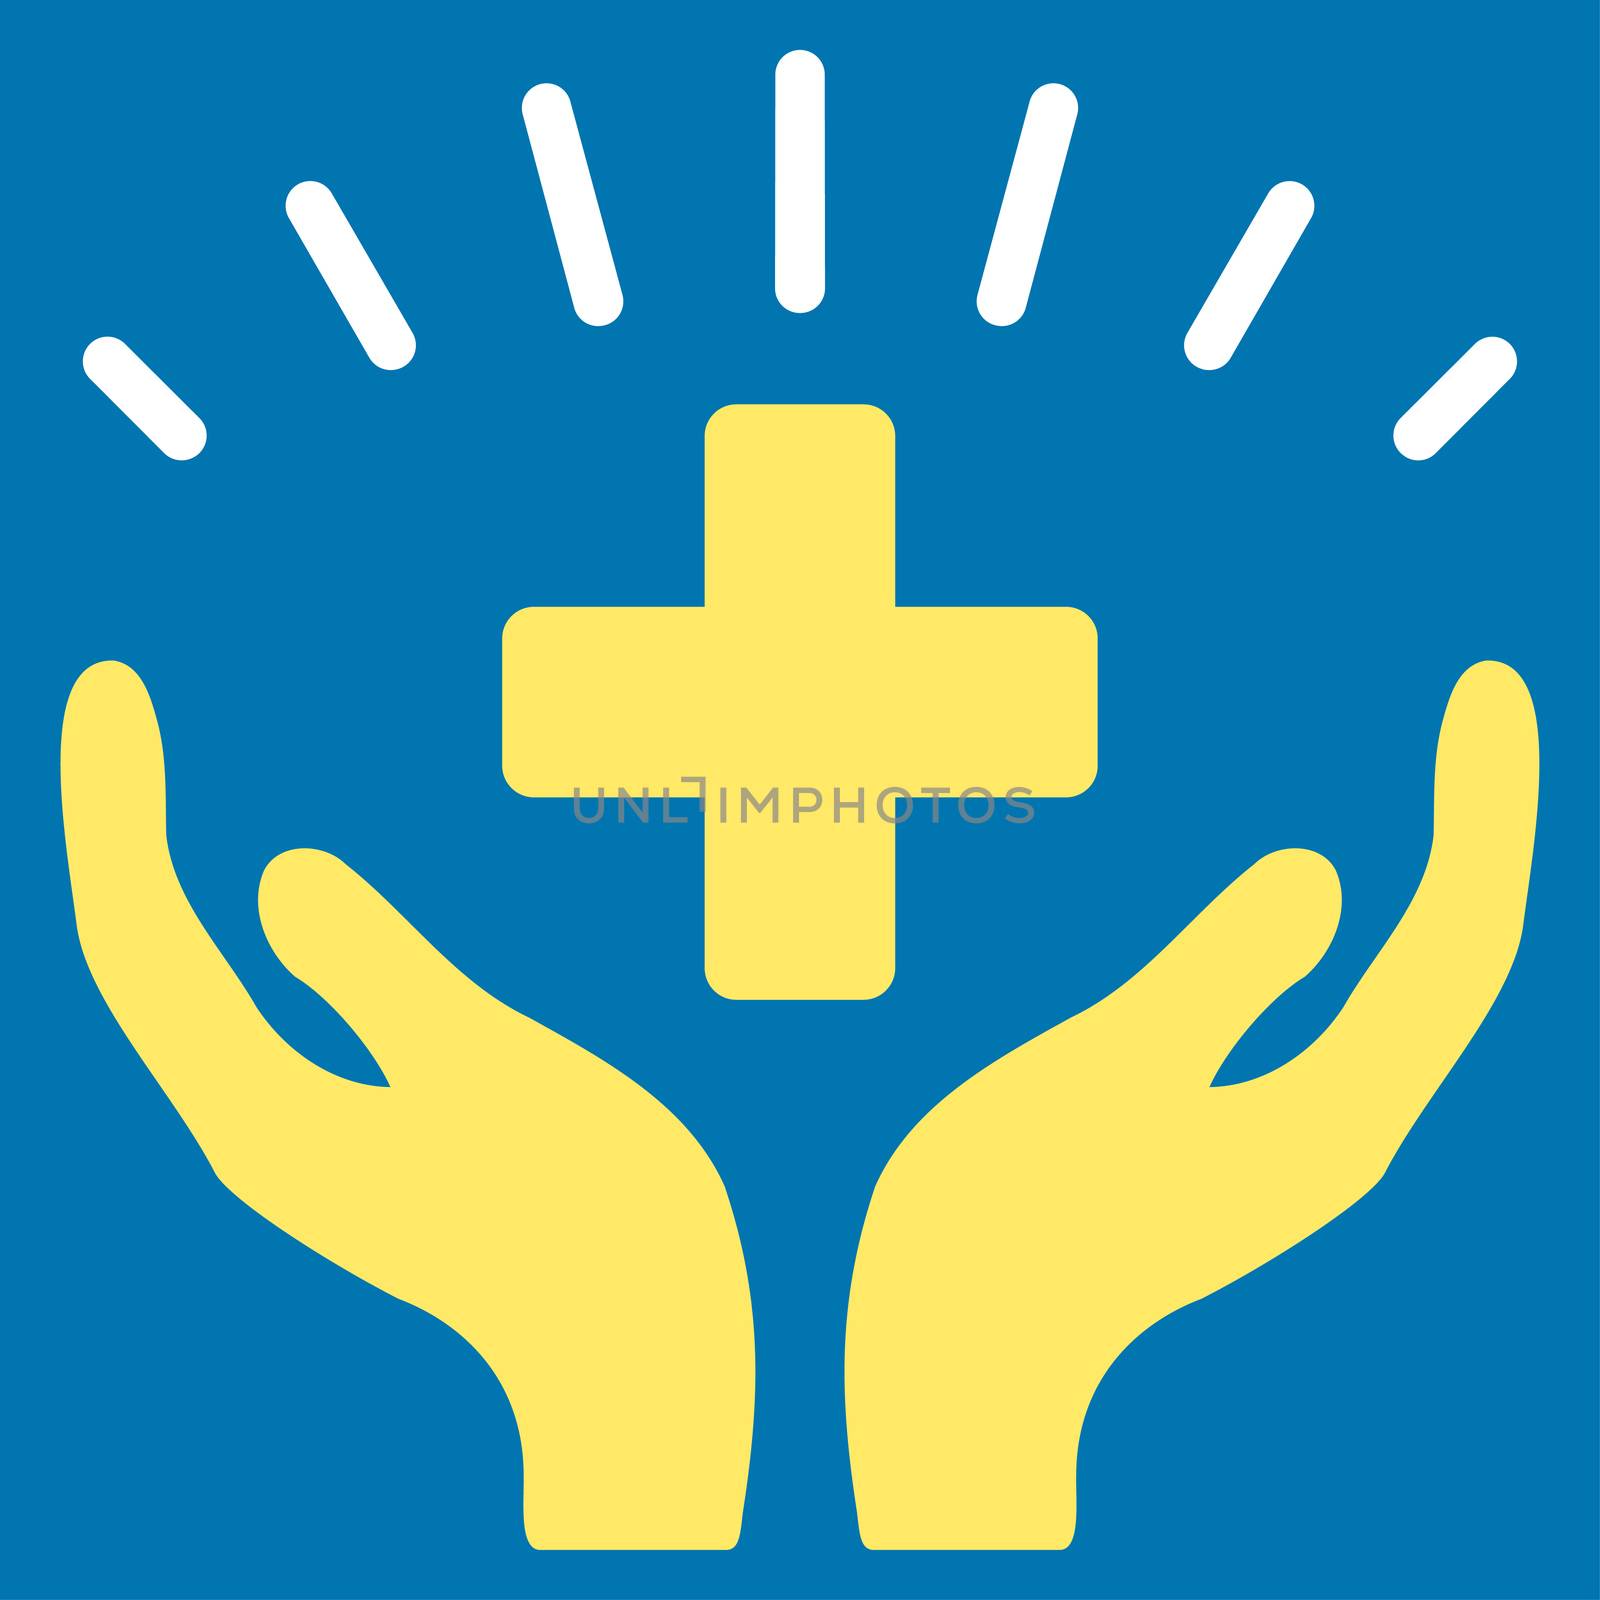 Medical Prosperity raster icon. Style is bicolor flat symbol, yellow and white colors, rounded angles, blue background.